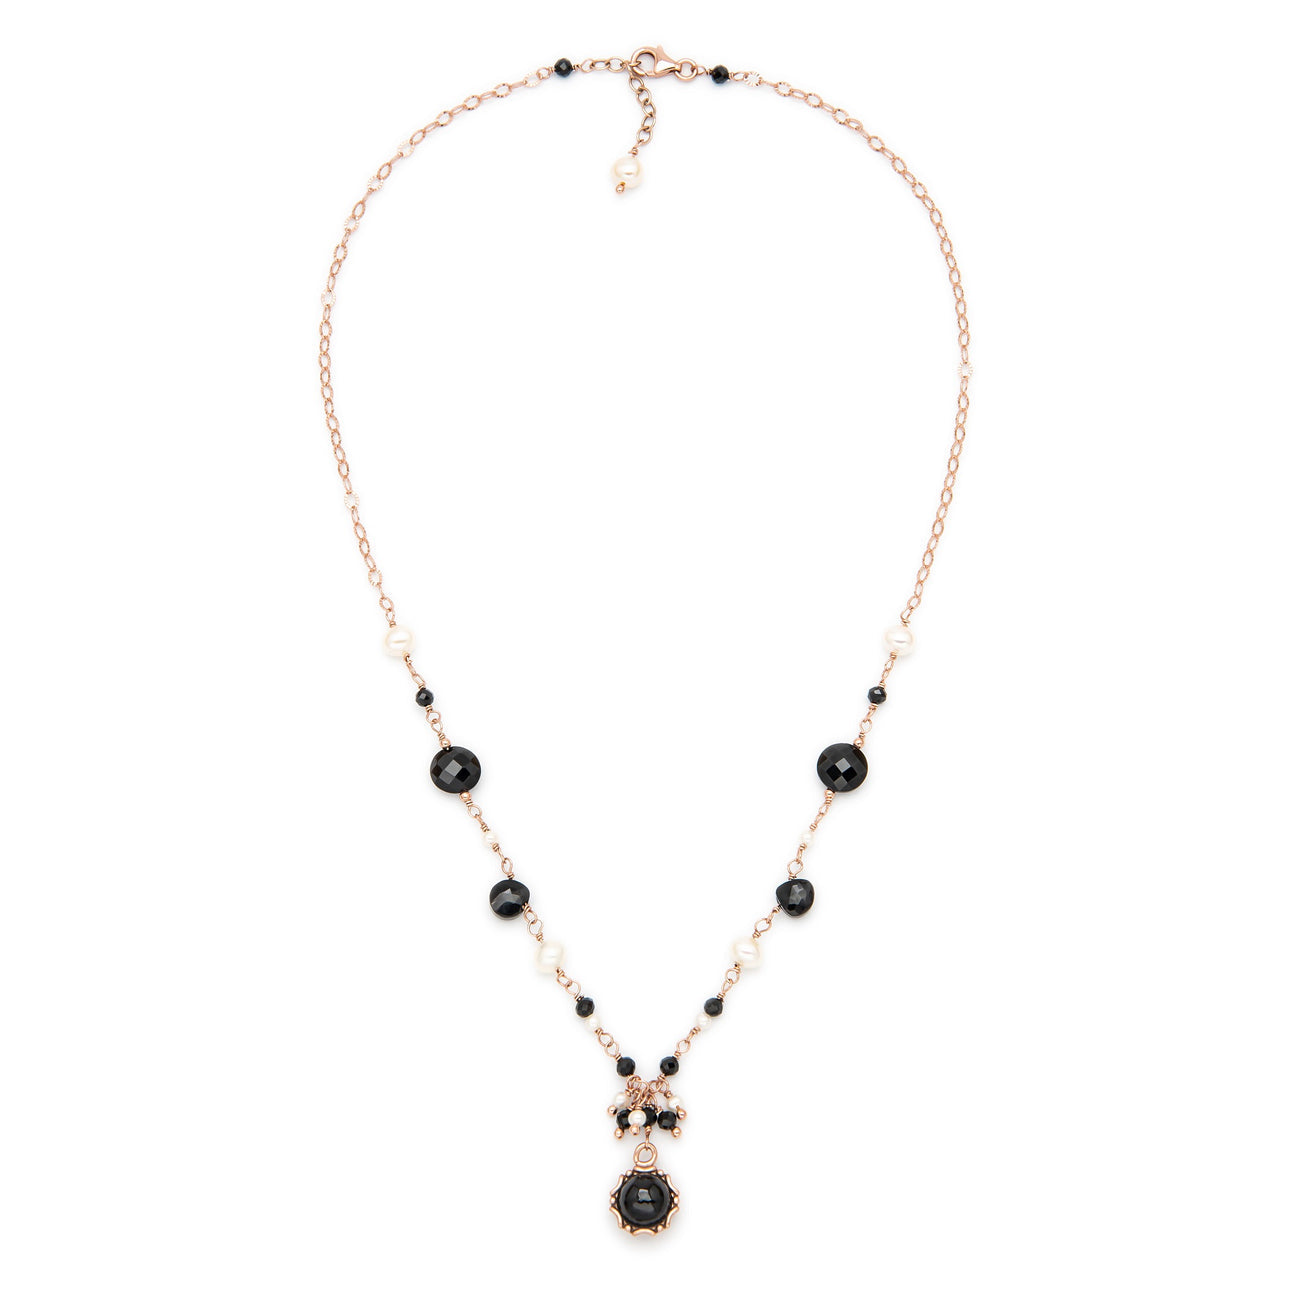 Italian Black Spinel and Onyx with Pearls Necklace